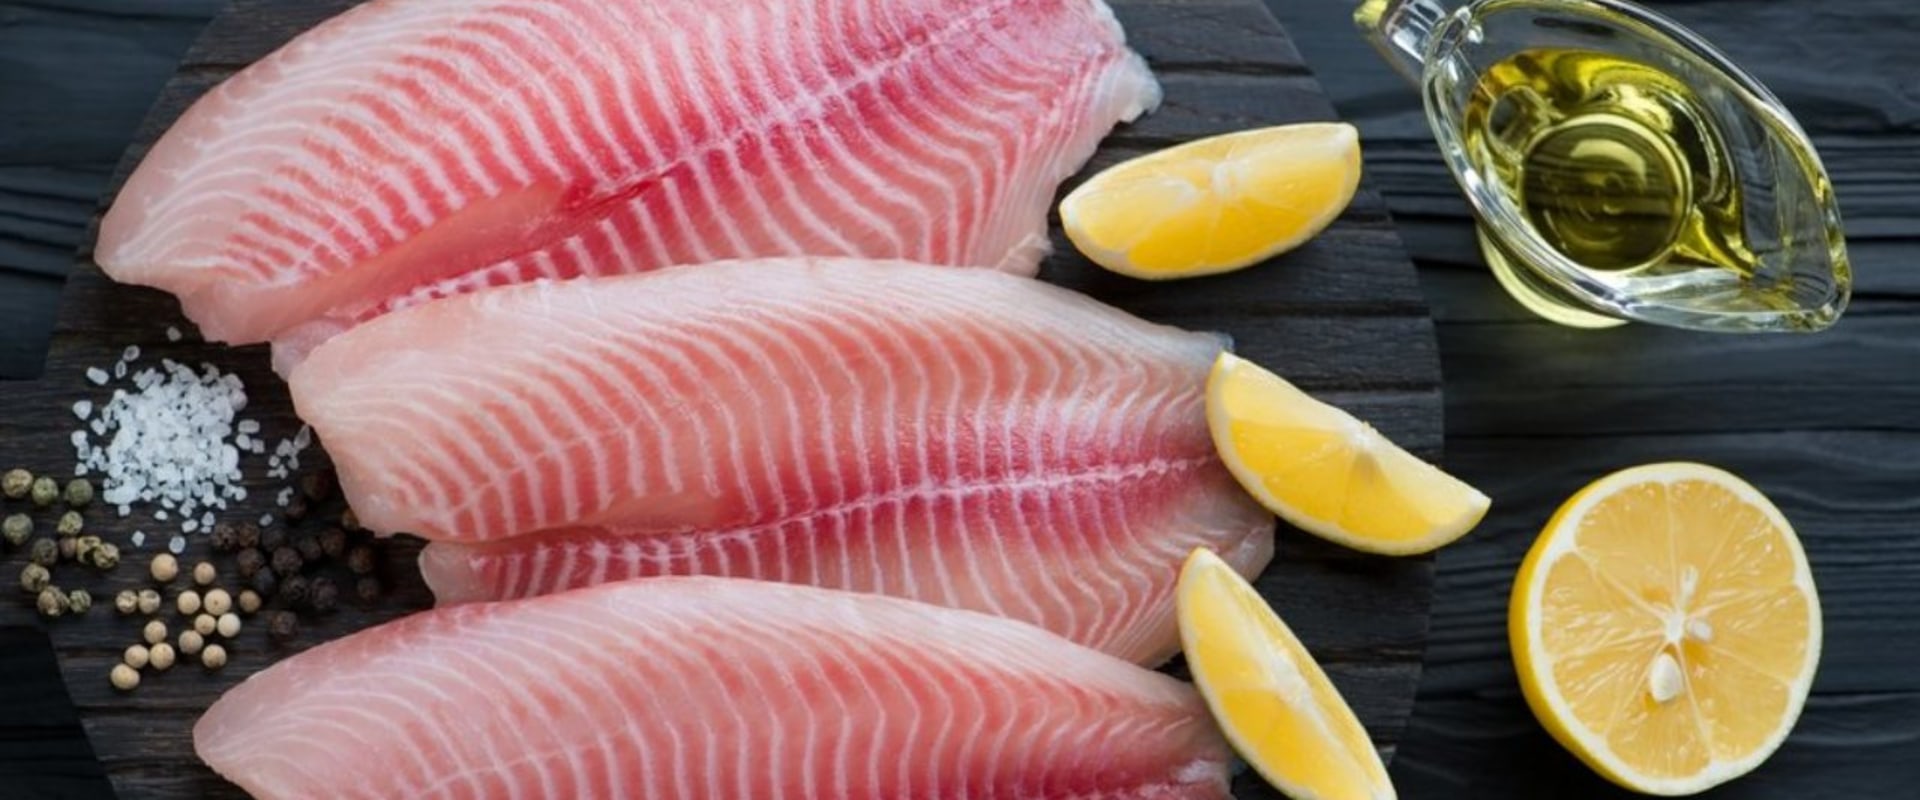 Is fish cheaper than meat?